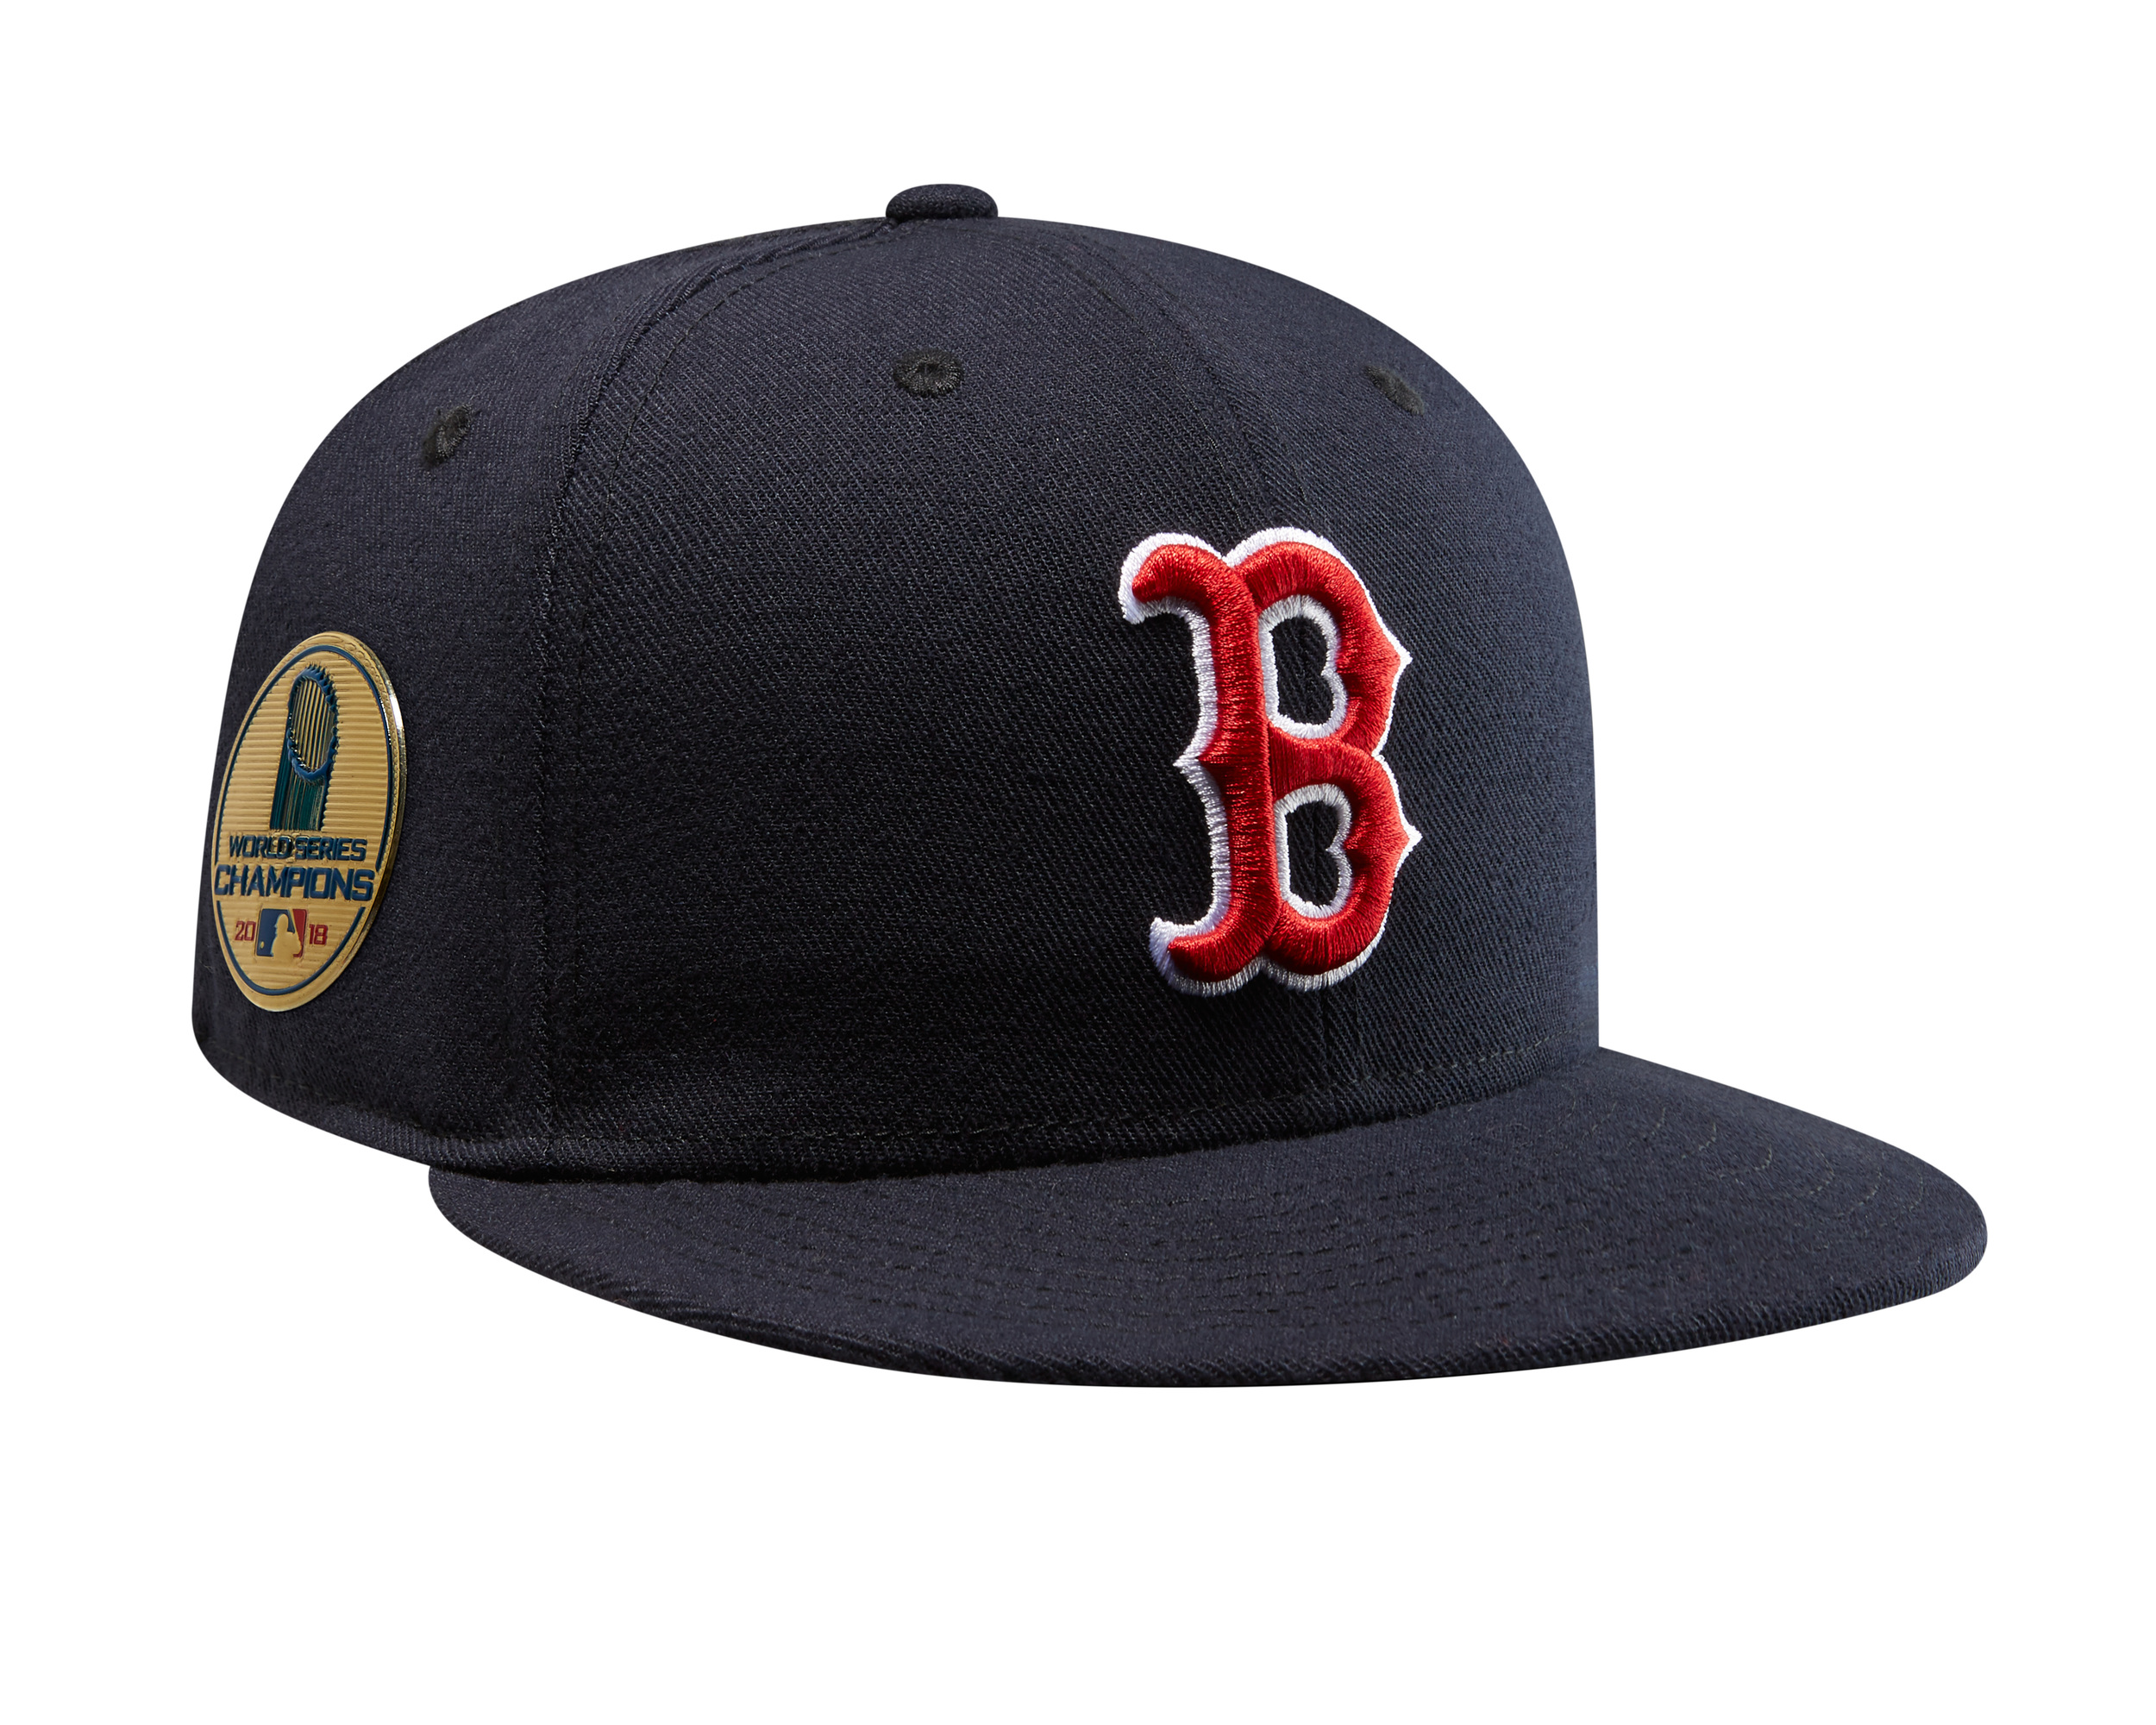 New Era Cap Drops Red Sox World Series Champion Collection with Hats and  Knits - WearTesters